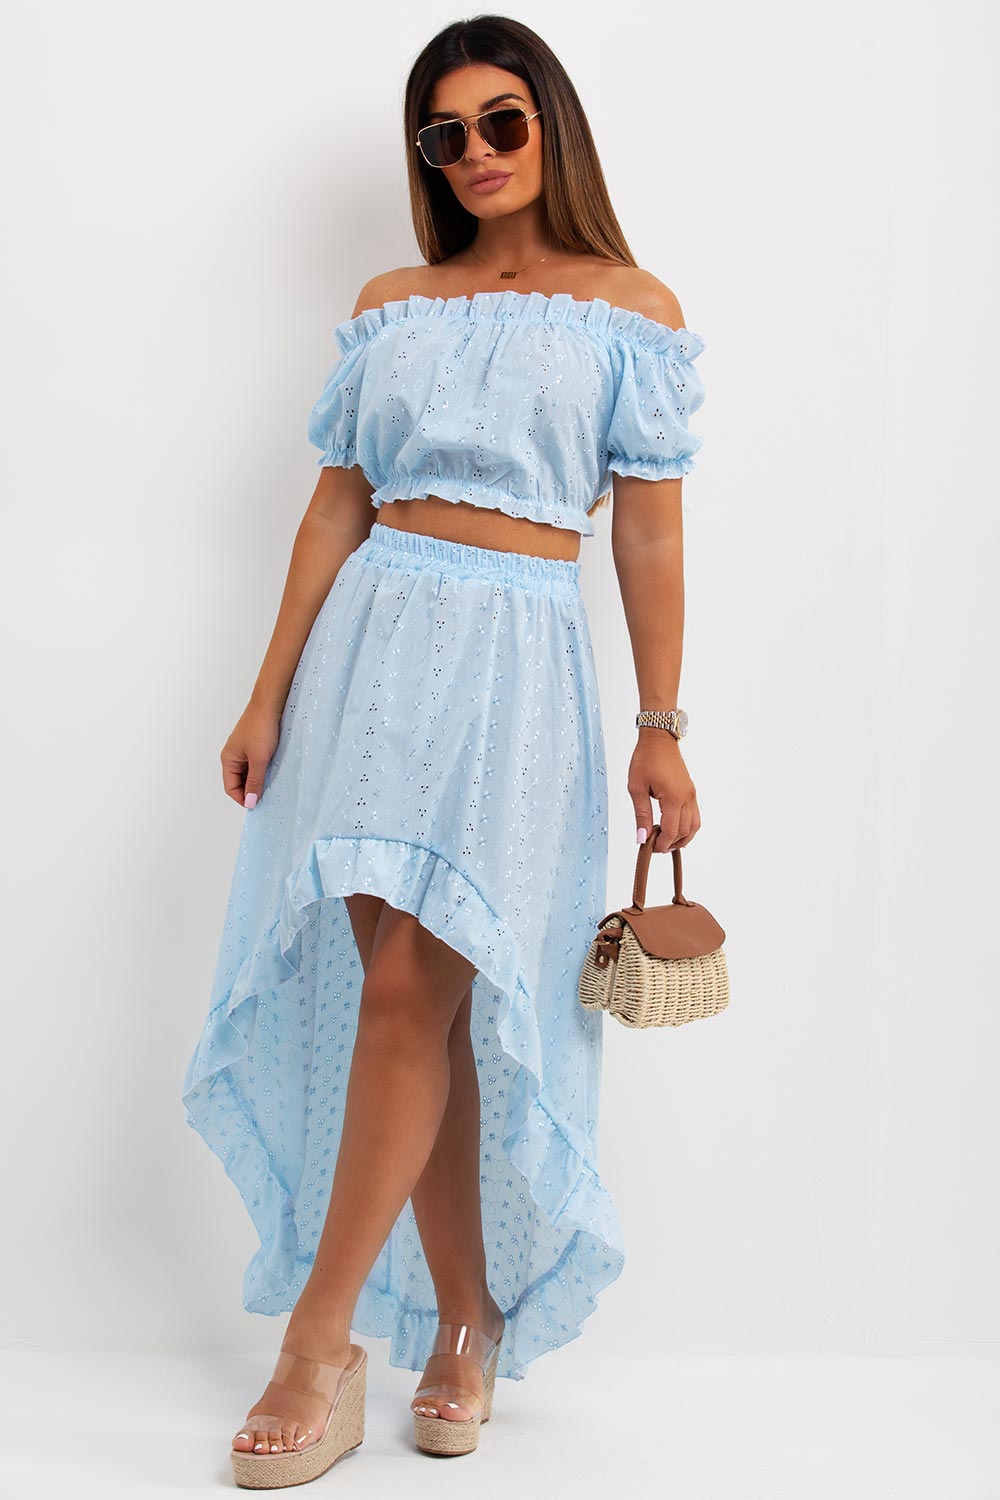 broderie anglaise ruffle frill high low mullet skirt and off shoulder top co ord set